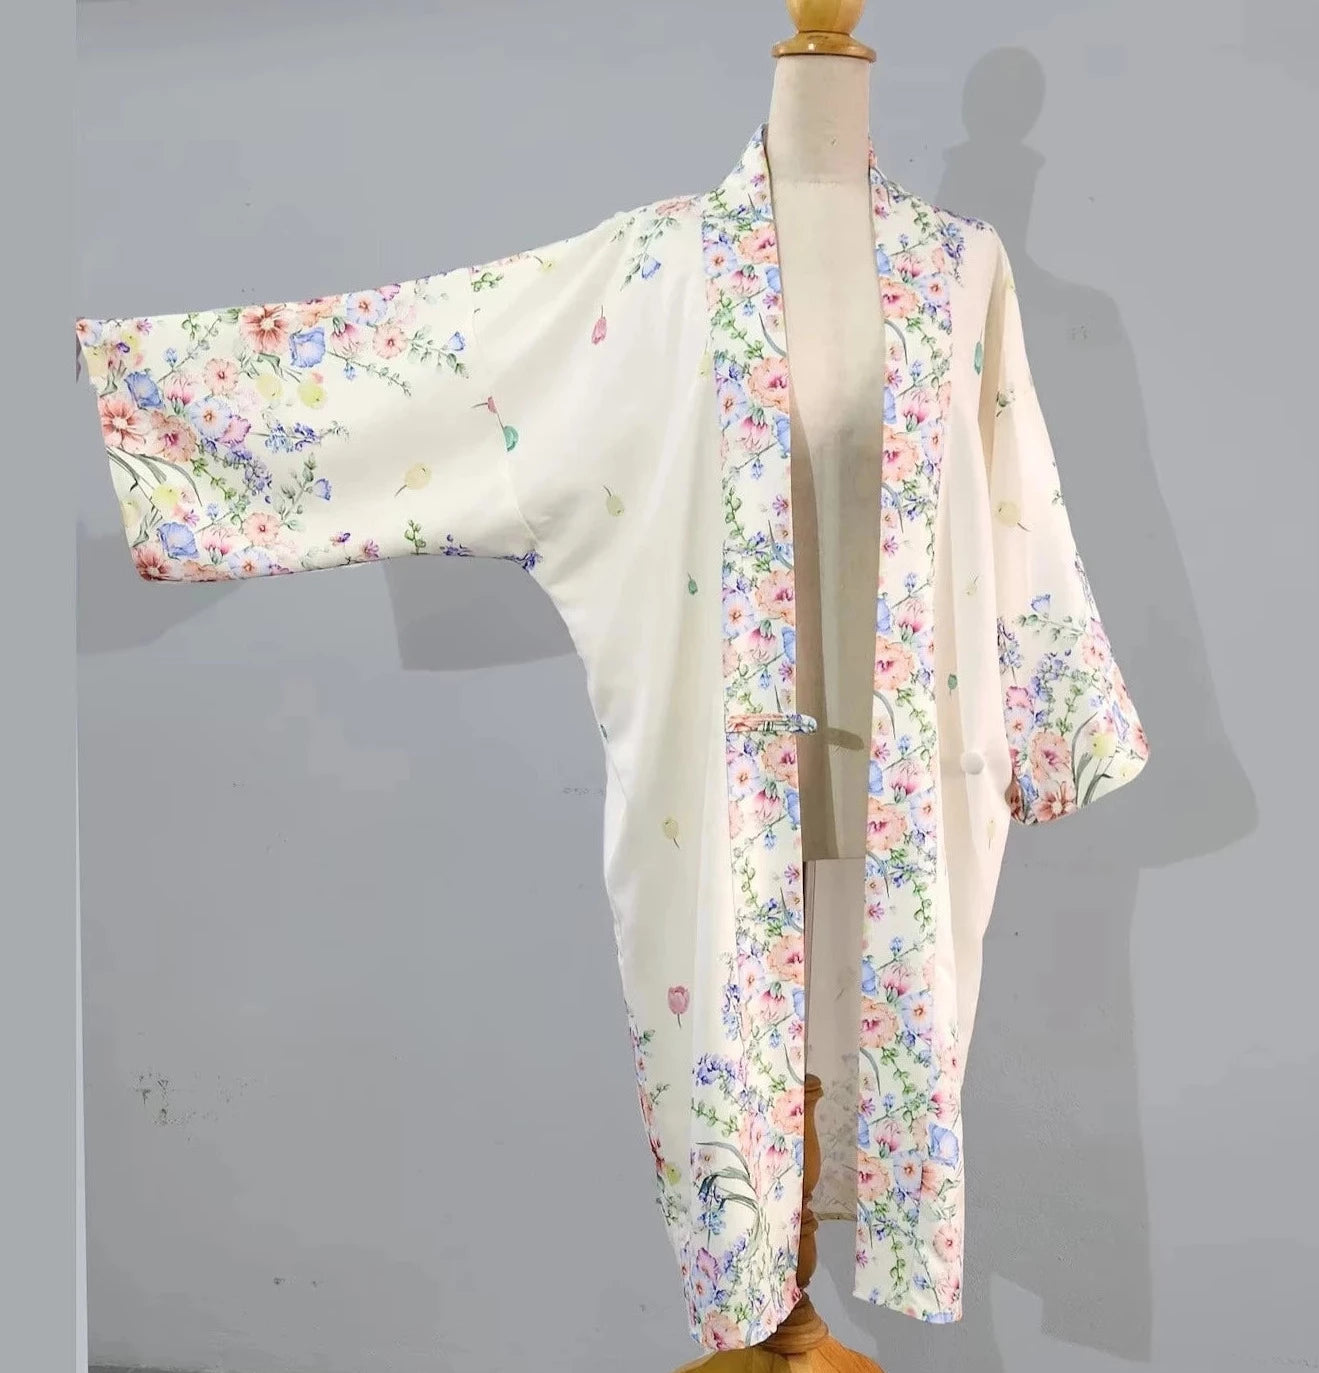 Cream floral oriental kimono robe inspired by 1920s loungewear fashion. Can be worn as 1920s duster summer coat, Gatsby coat or 1920s nightgown.